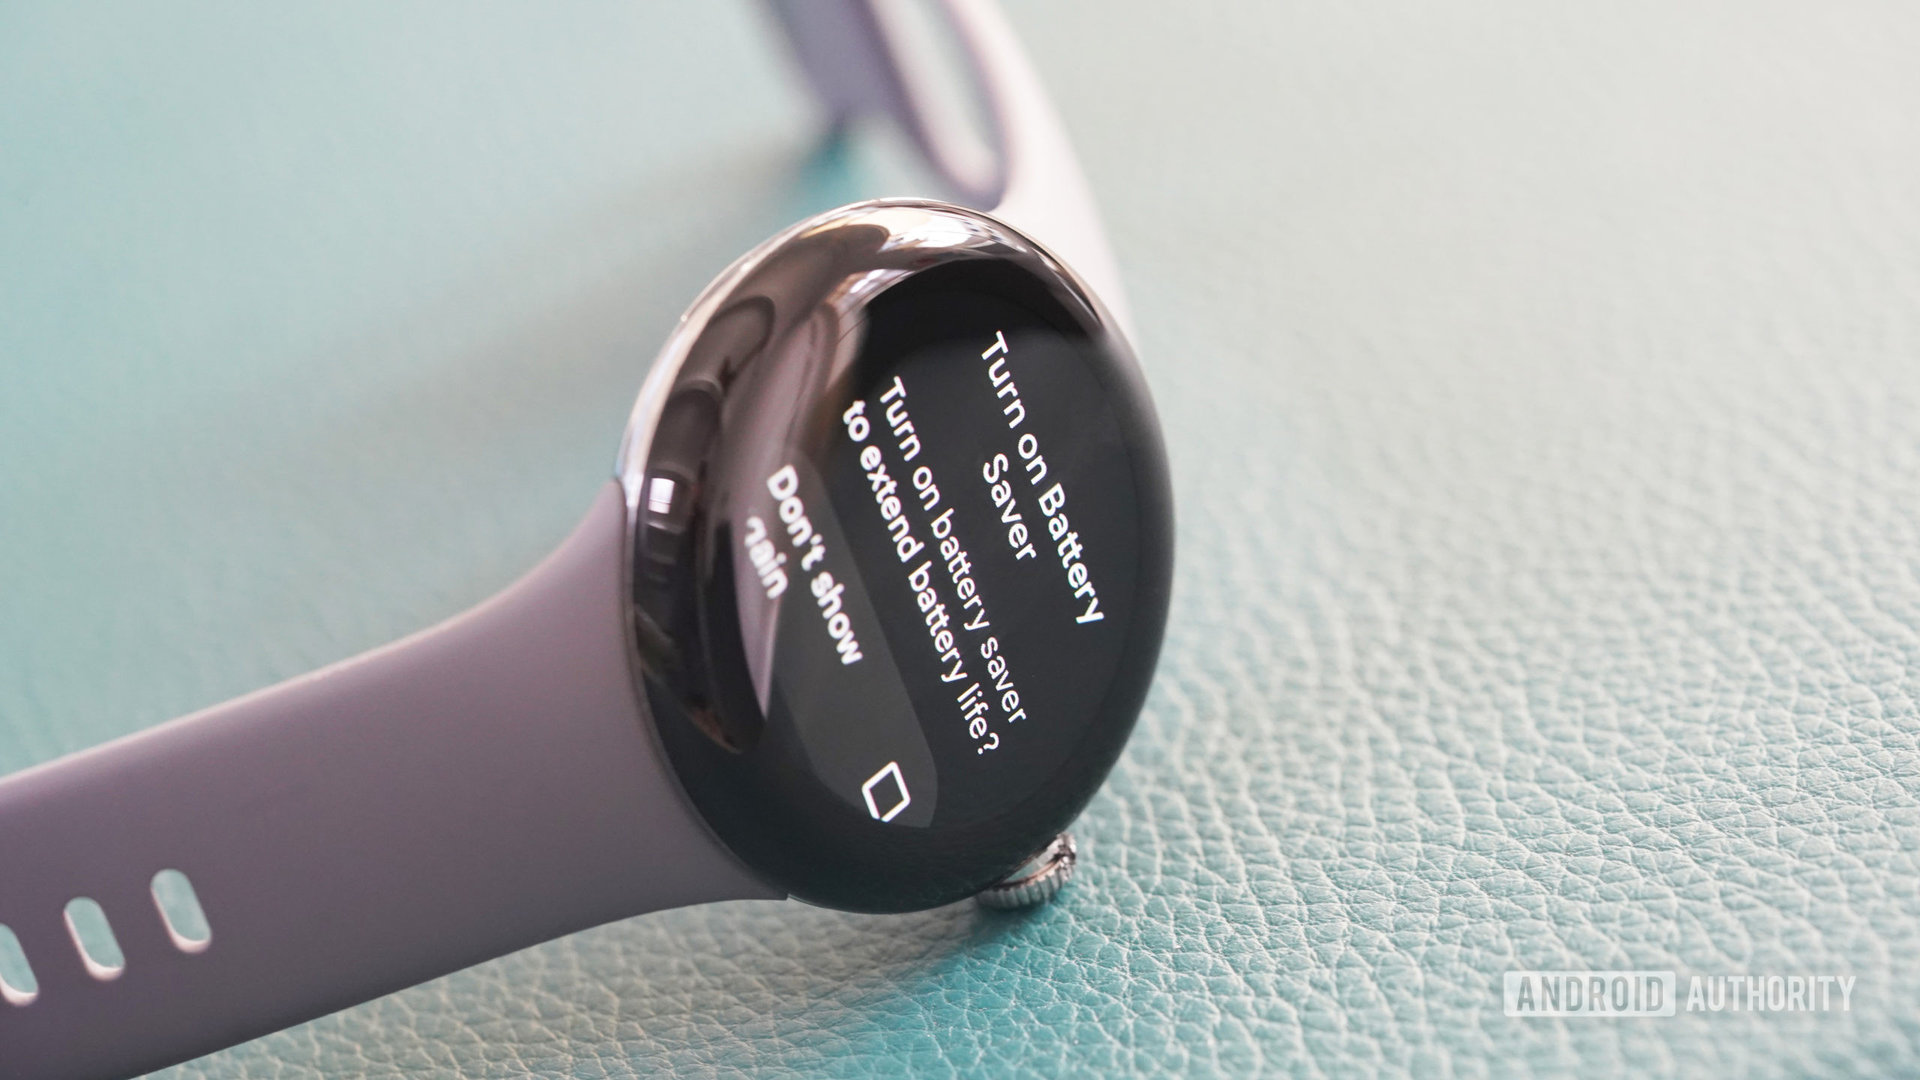 A Google Pixel Watch rests on its side display the Battery Saver confirmation screen.